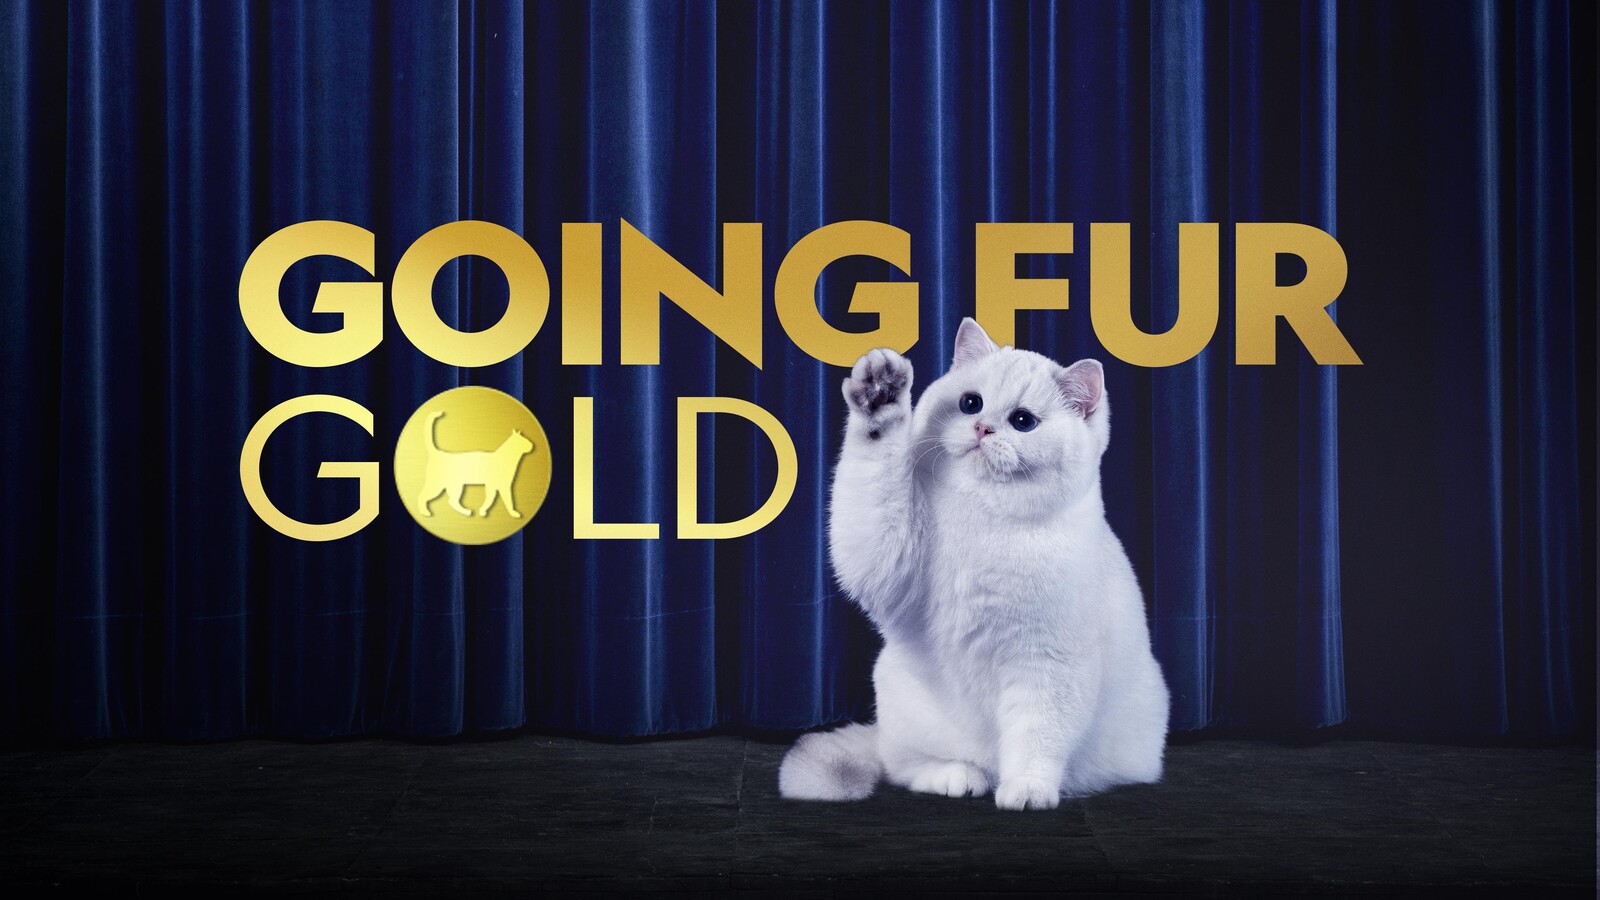 How to Watch Going Fur Gold in UK on Disney Plus